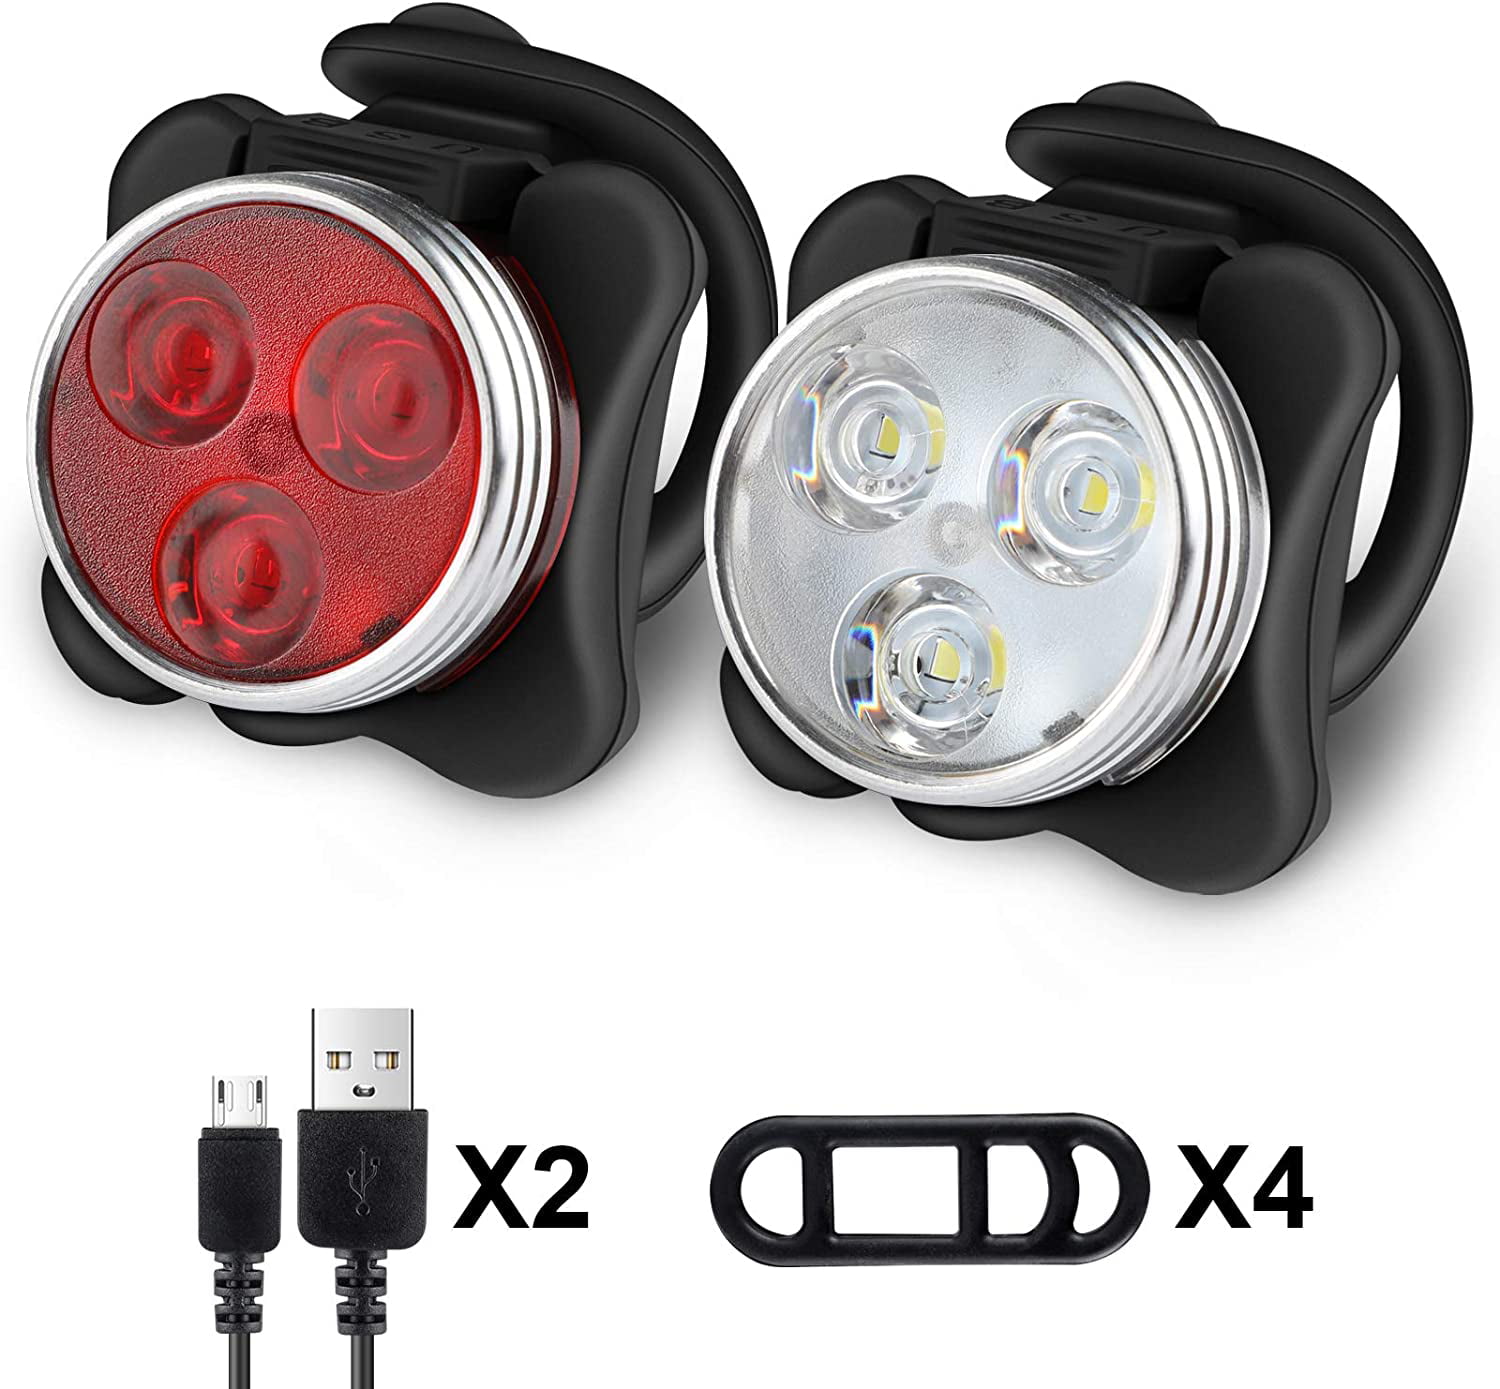 Water Resistent Bicycle Front and Rear Light Rechargeable 4 Modes Energy Saving Safety Ailiebhaus Bike LED Lights Set 1 x Head Light, 2 x Tail Lights 